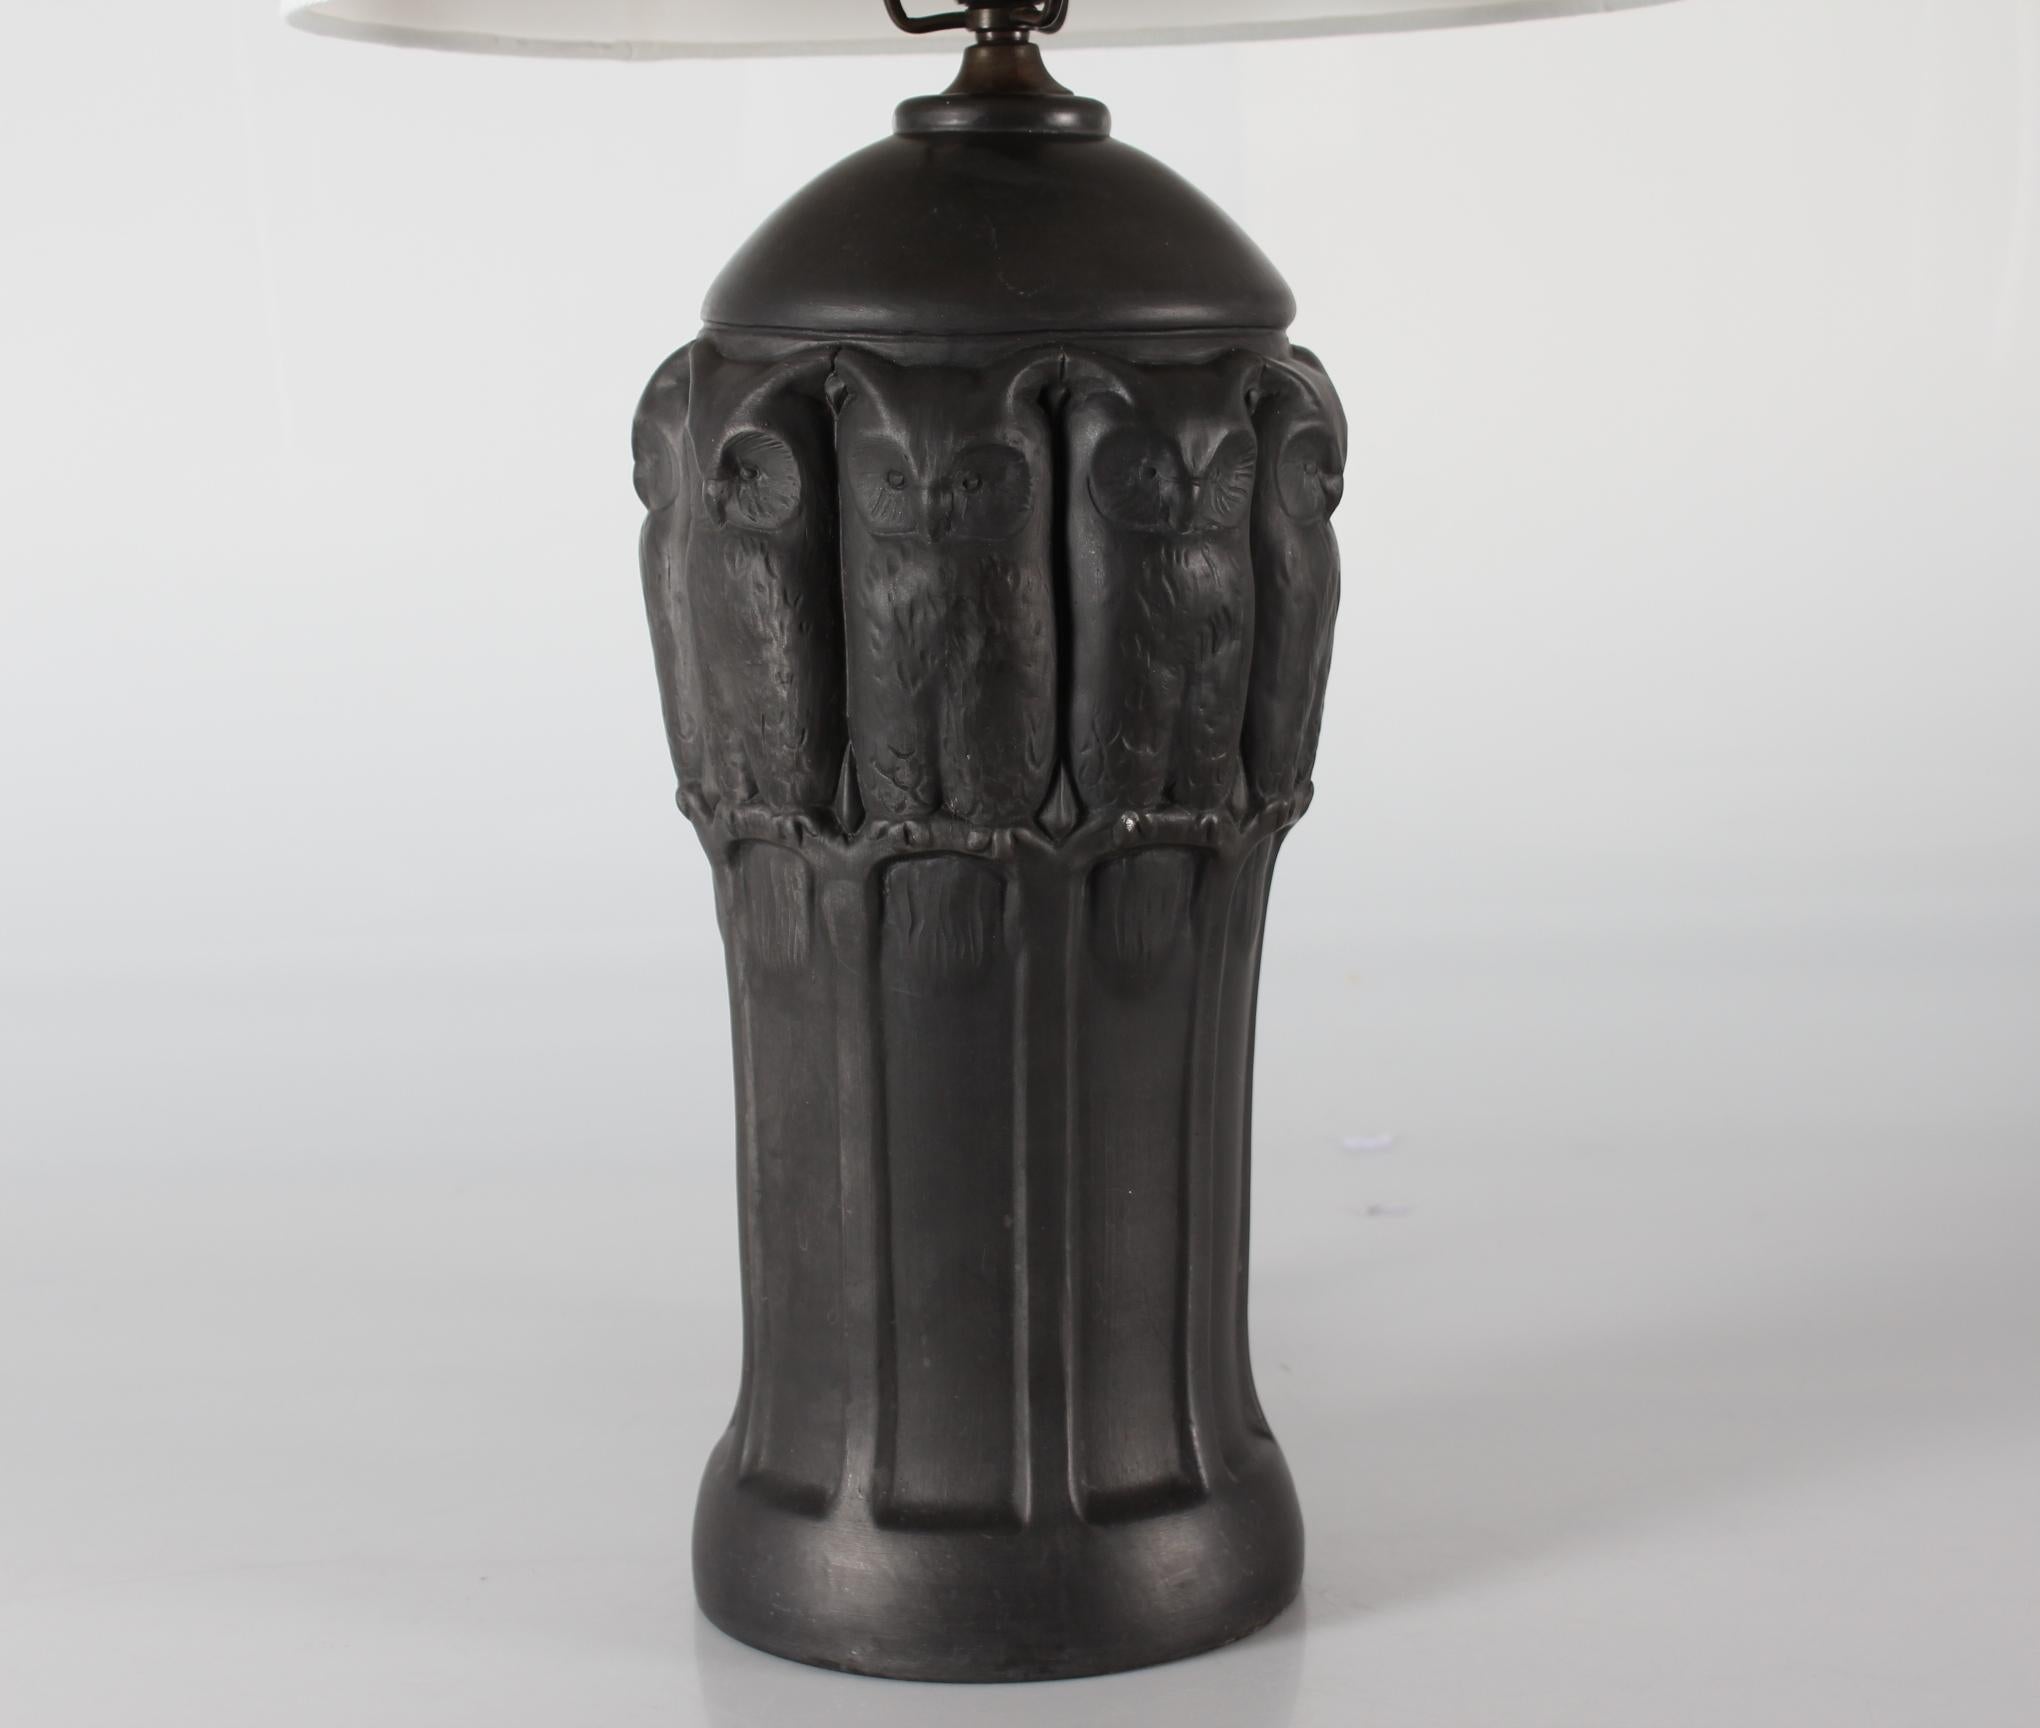 Danish Art Nouveau Table Lamp by L. Hjorth Ceramic, Black Terracotta with Owls  For Sale 5